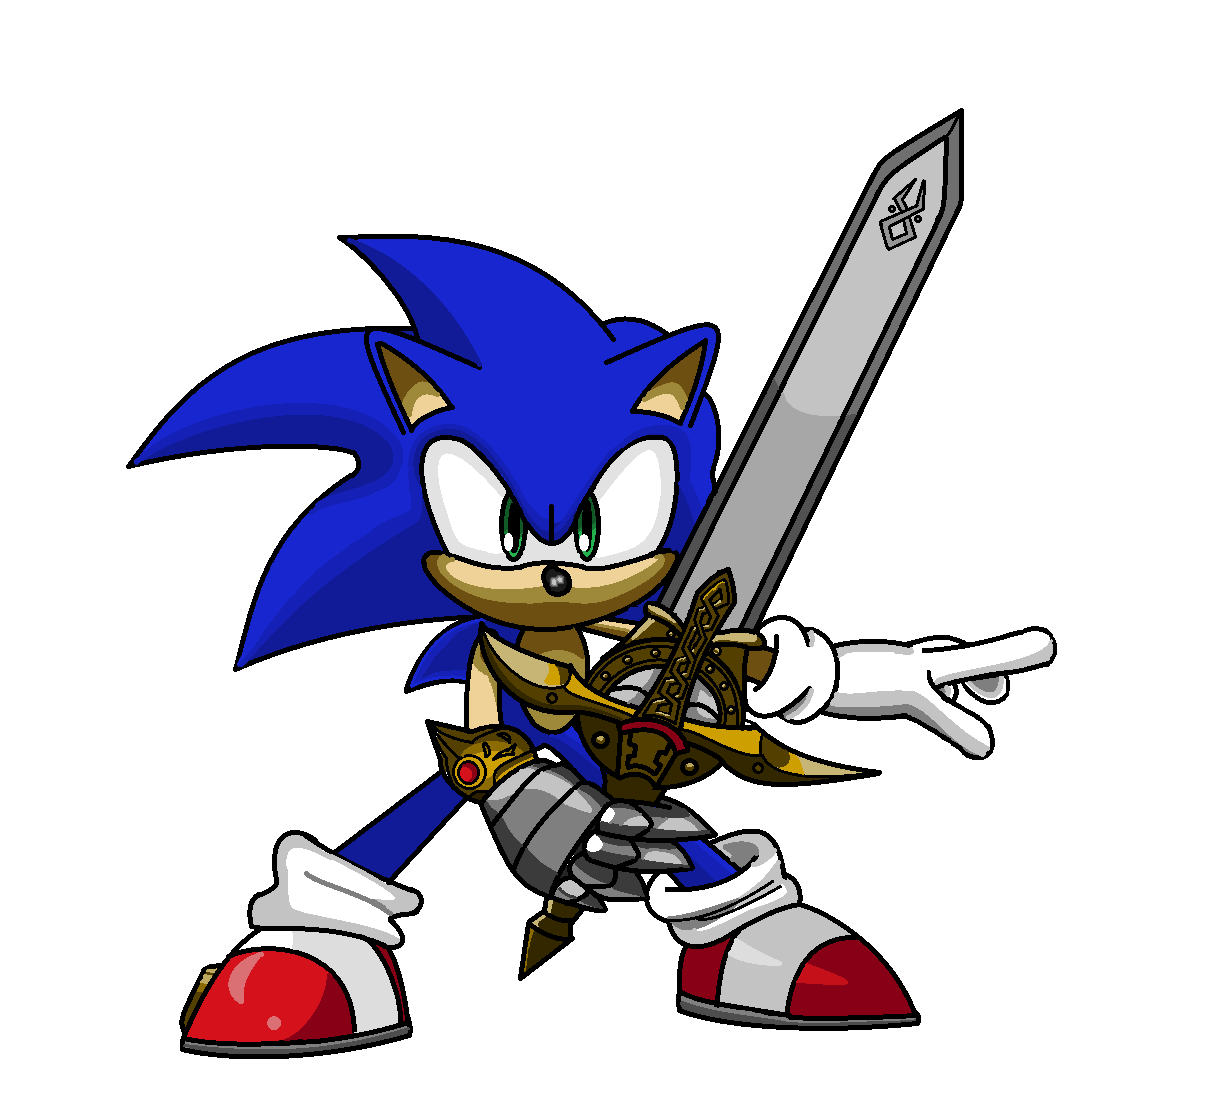 Sonic And The black knight (Sonic) by luigimario500 on DeviantArt.